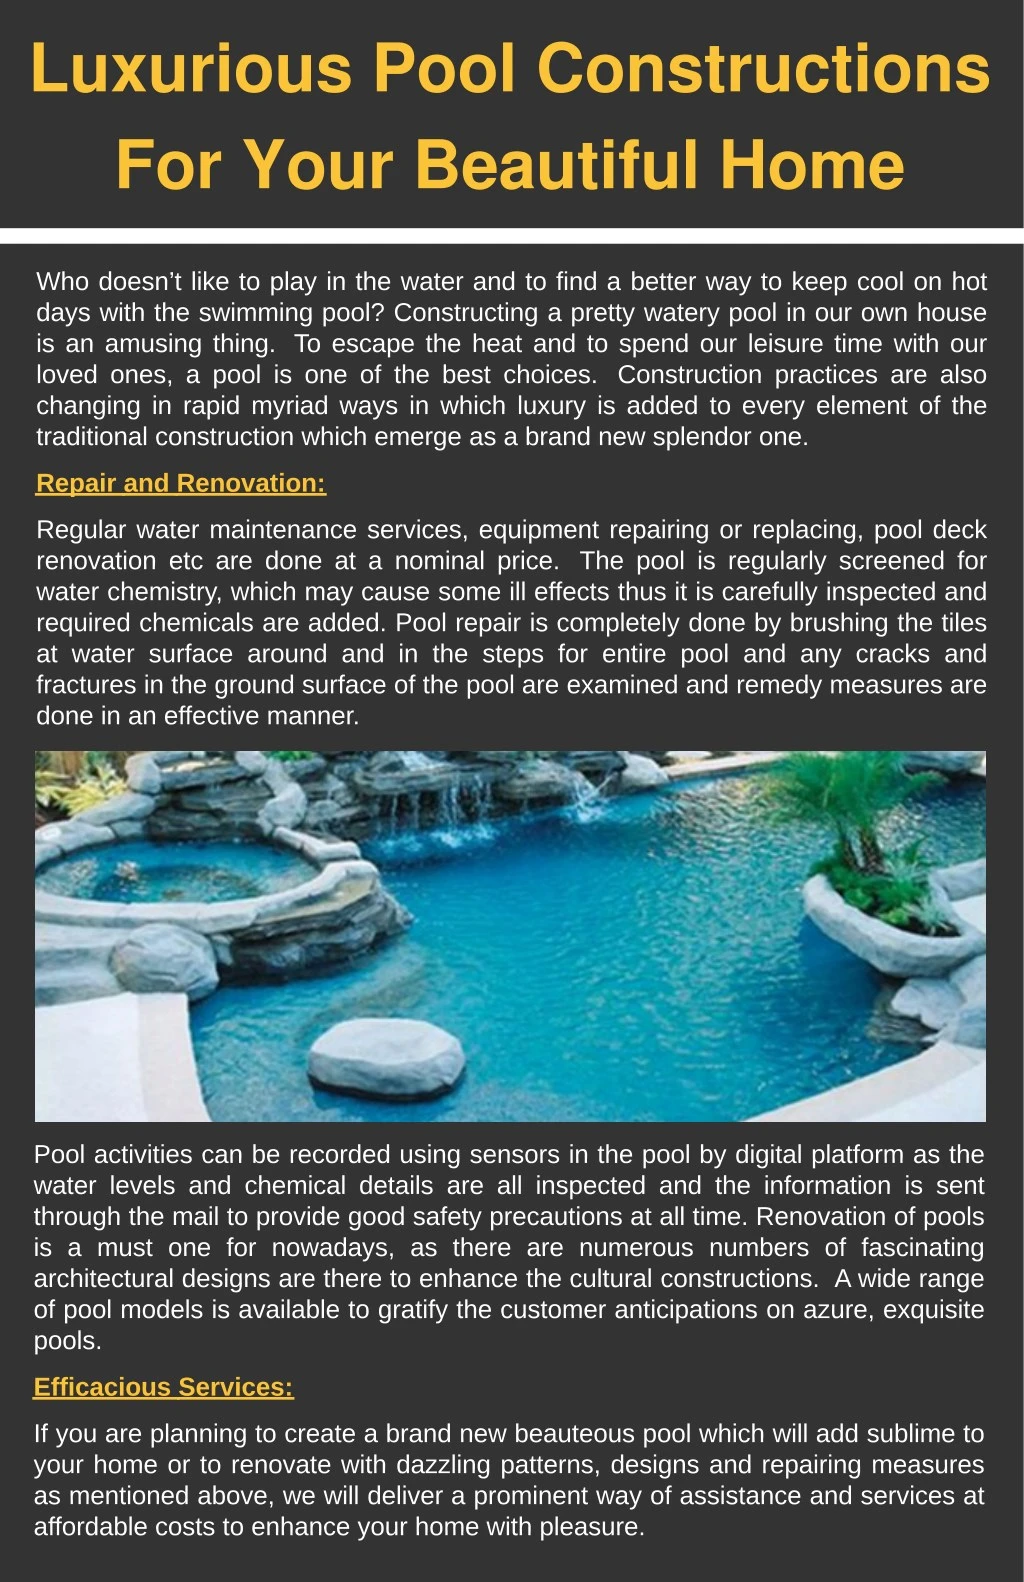 luxurious pool constructions for your beautiful